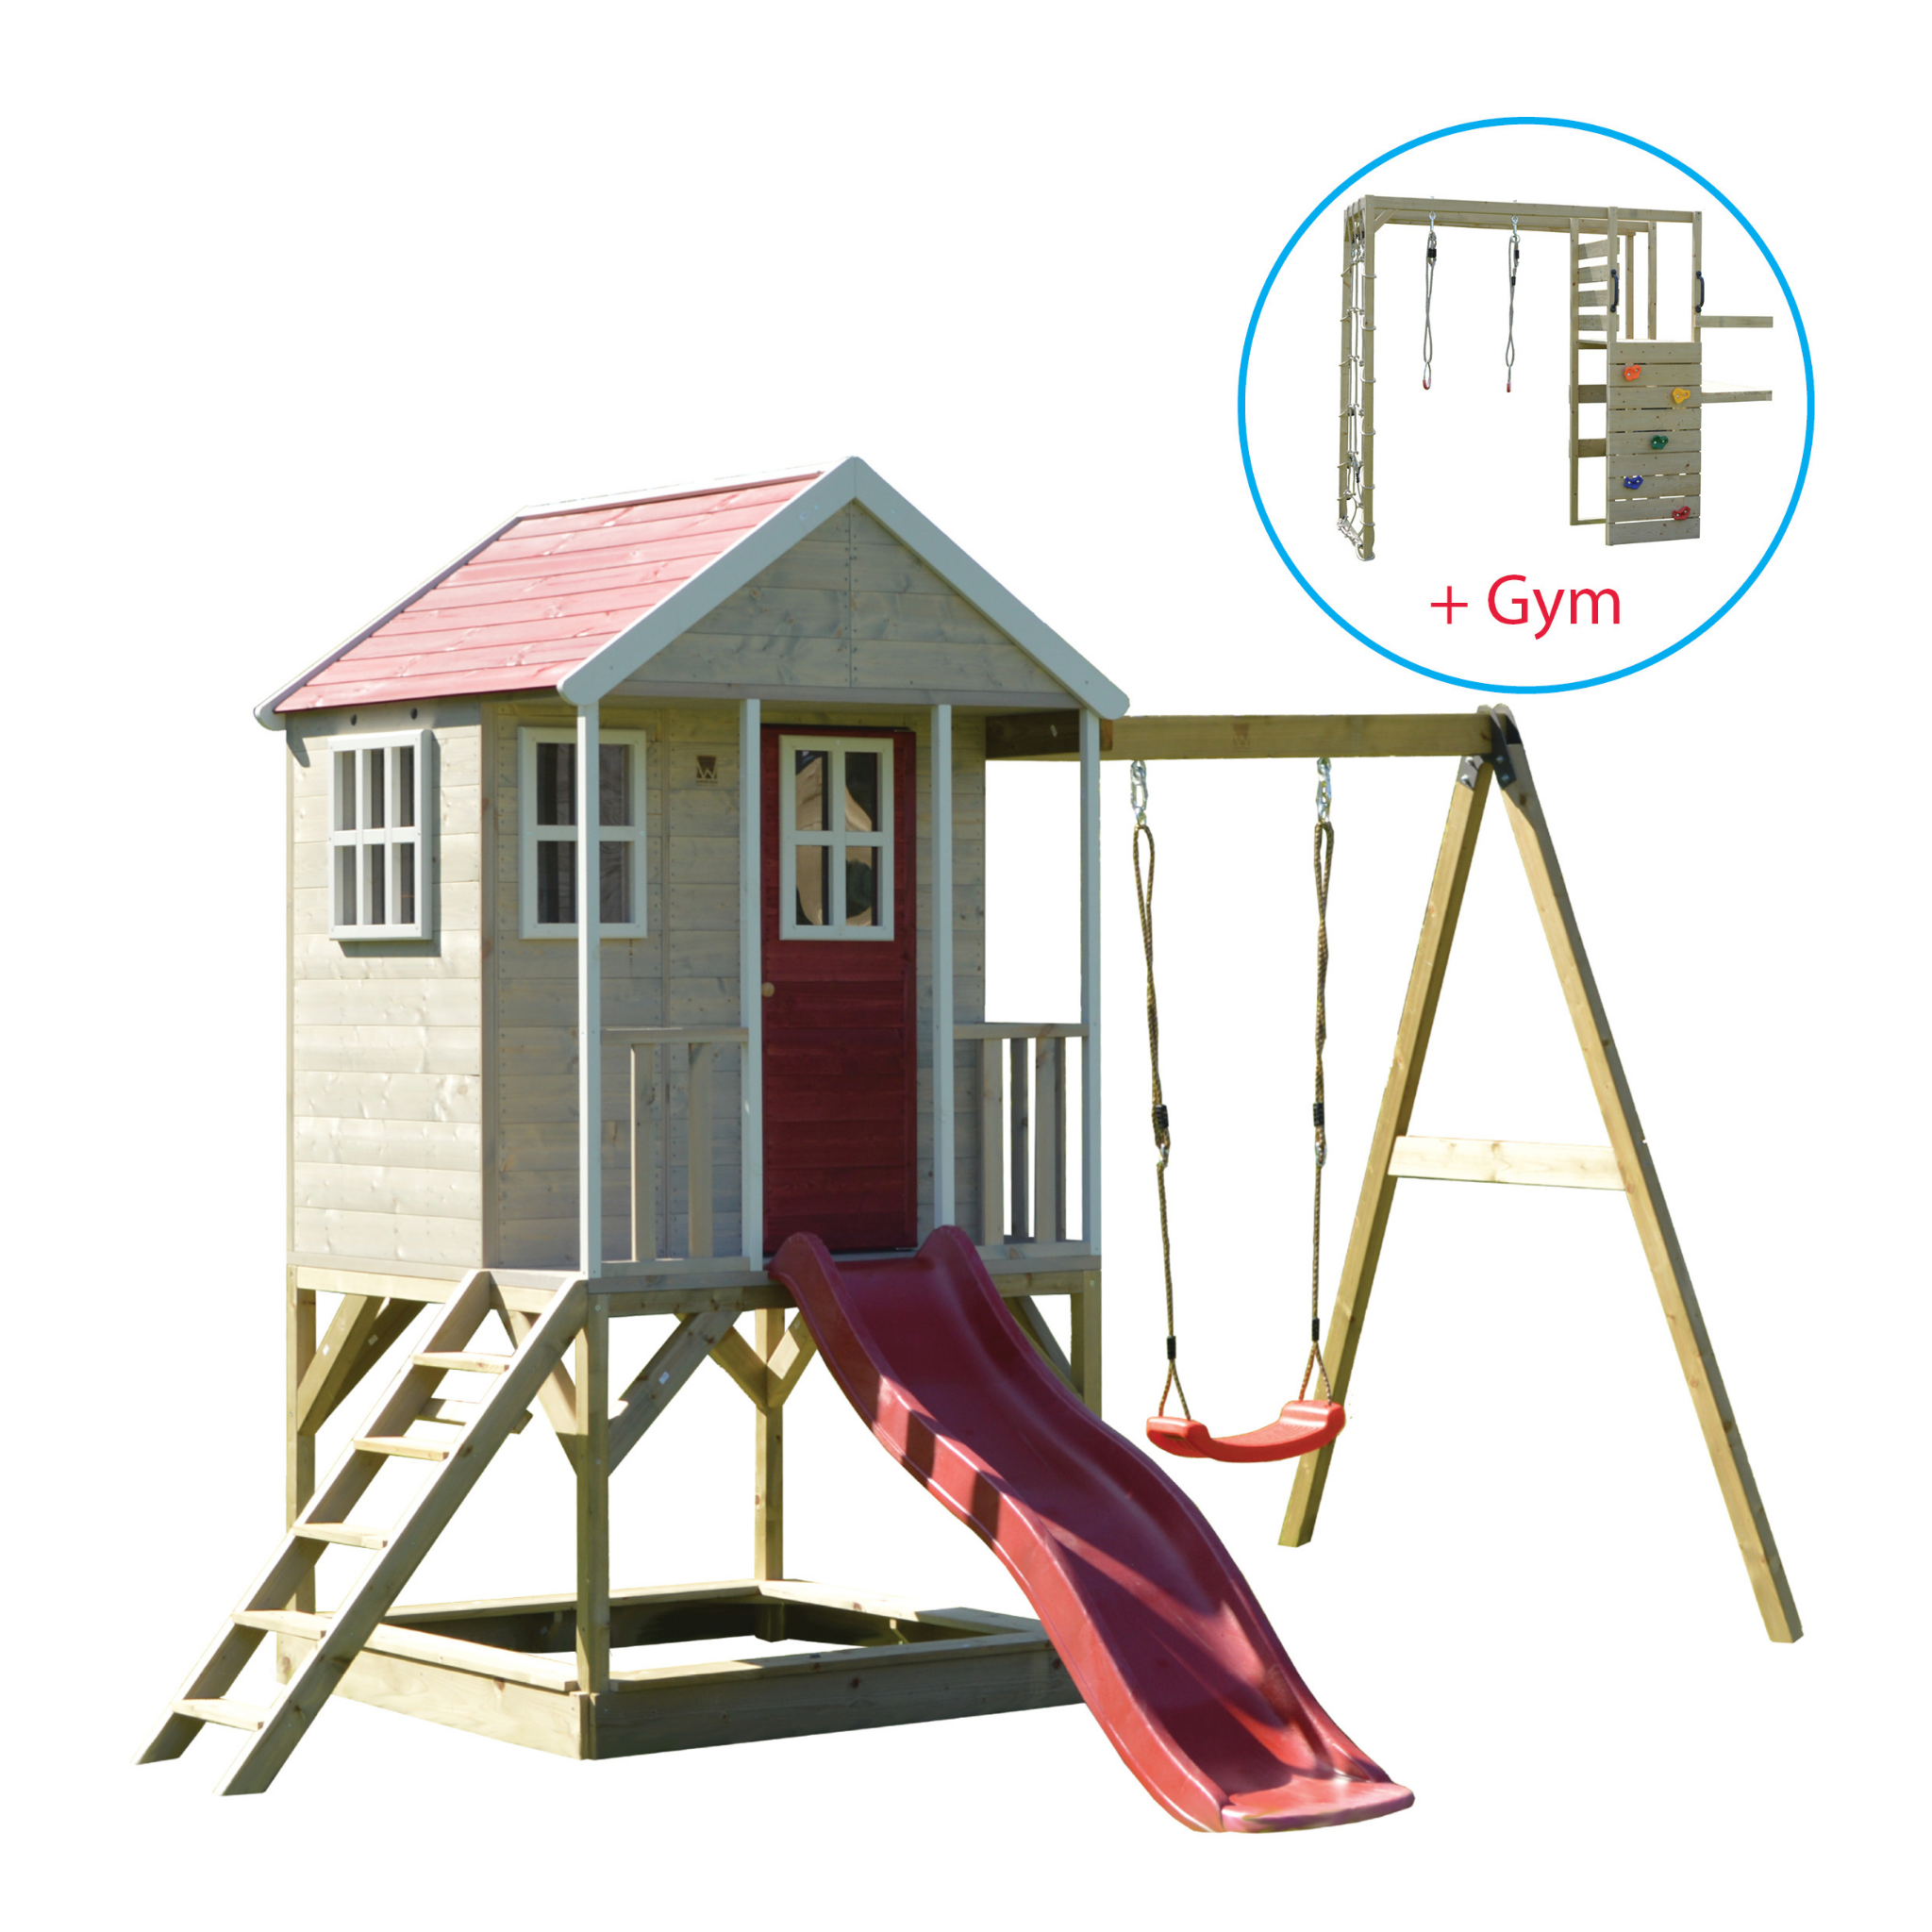 M10R-G Nordic Adventure House with Platform, Slide and Single Swing + Gym Attachment